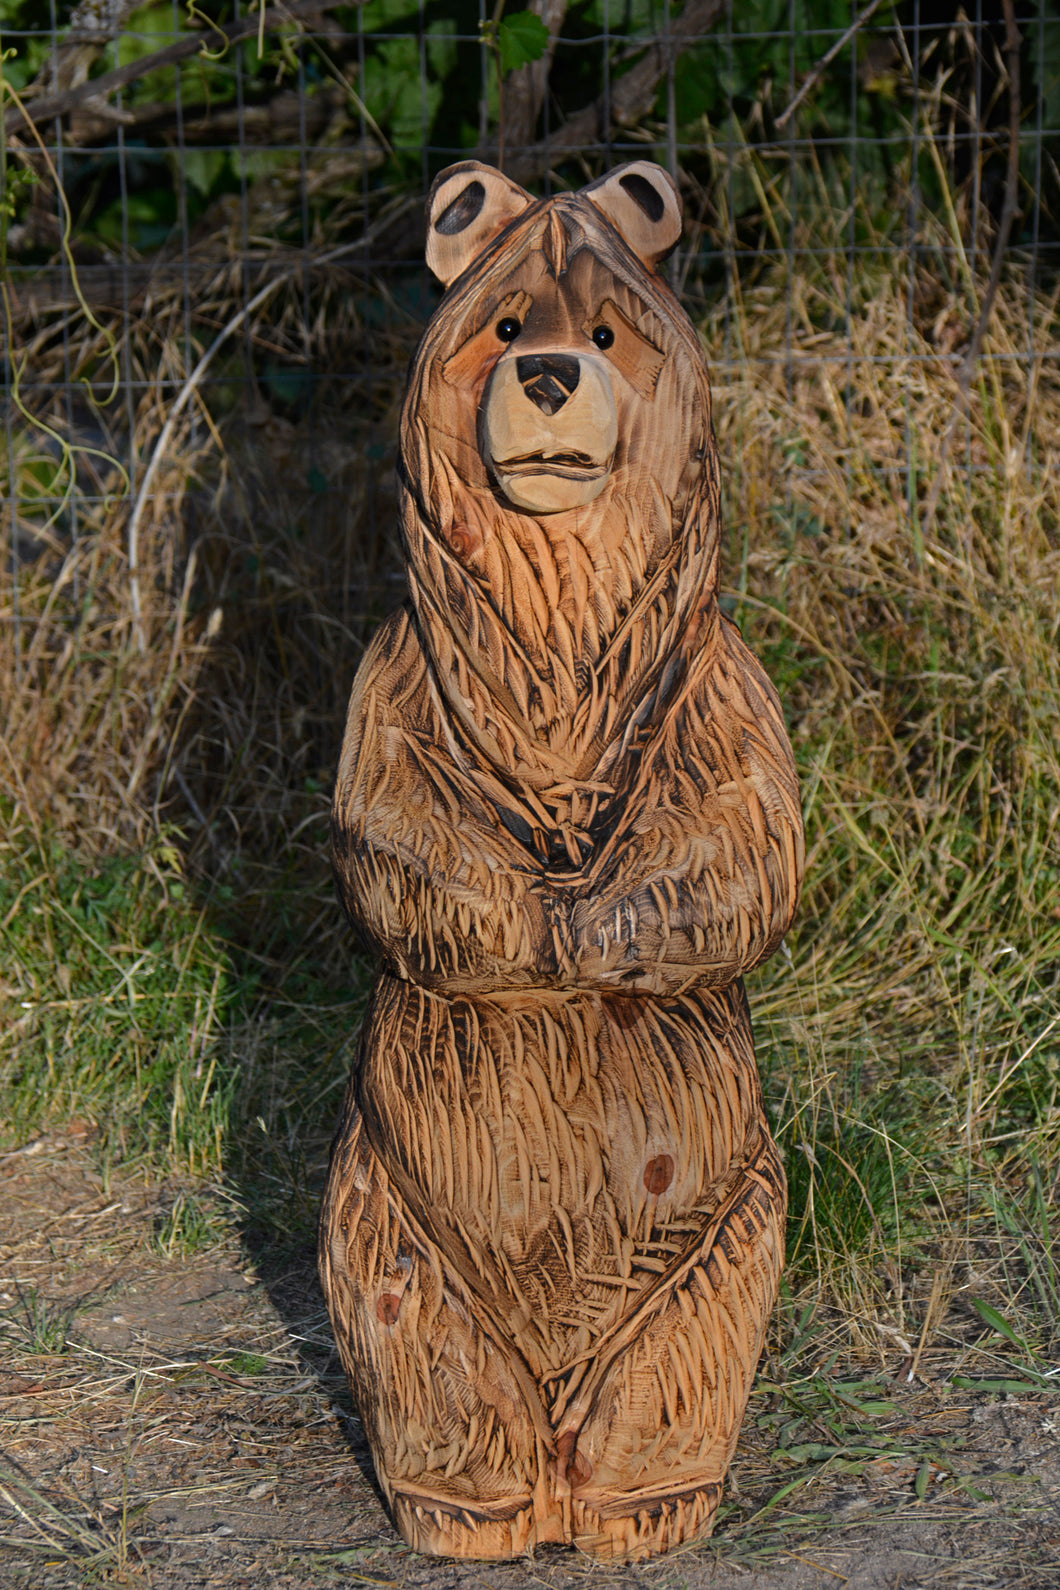 Versatile 3ft Chainsaw Carved Bear | Fishing, Roasting Marshmallows and Holding Flag Option